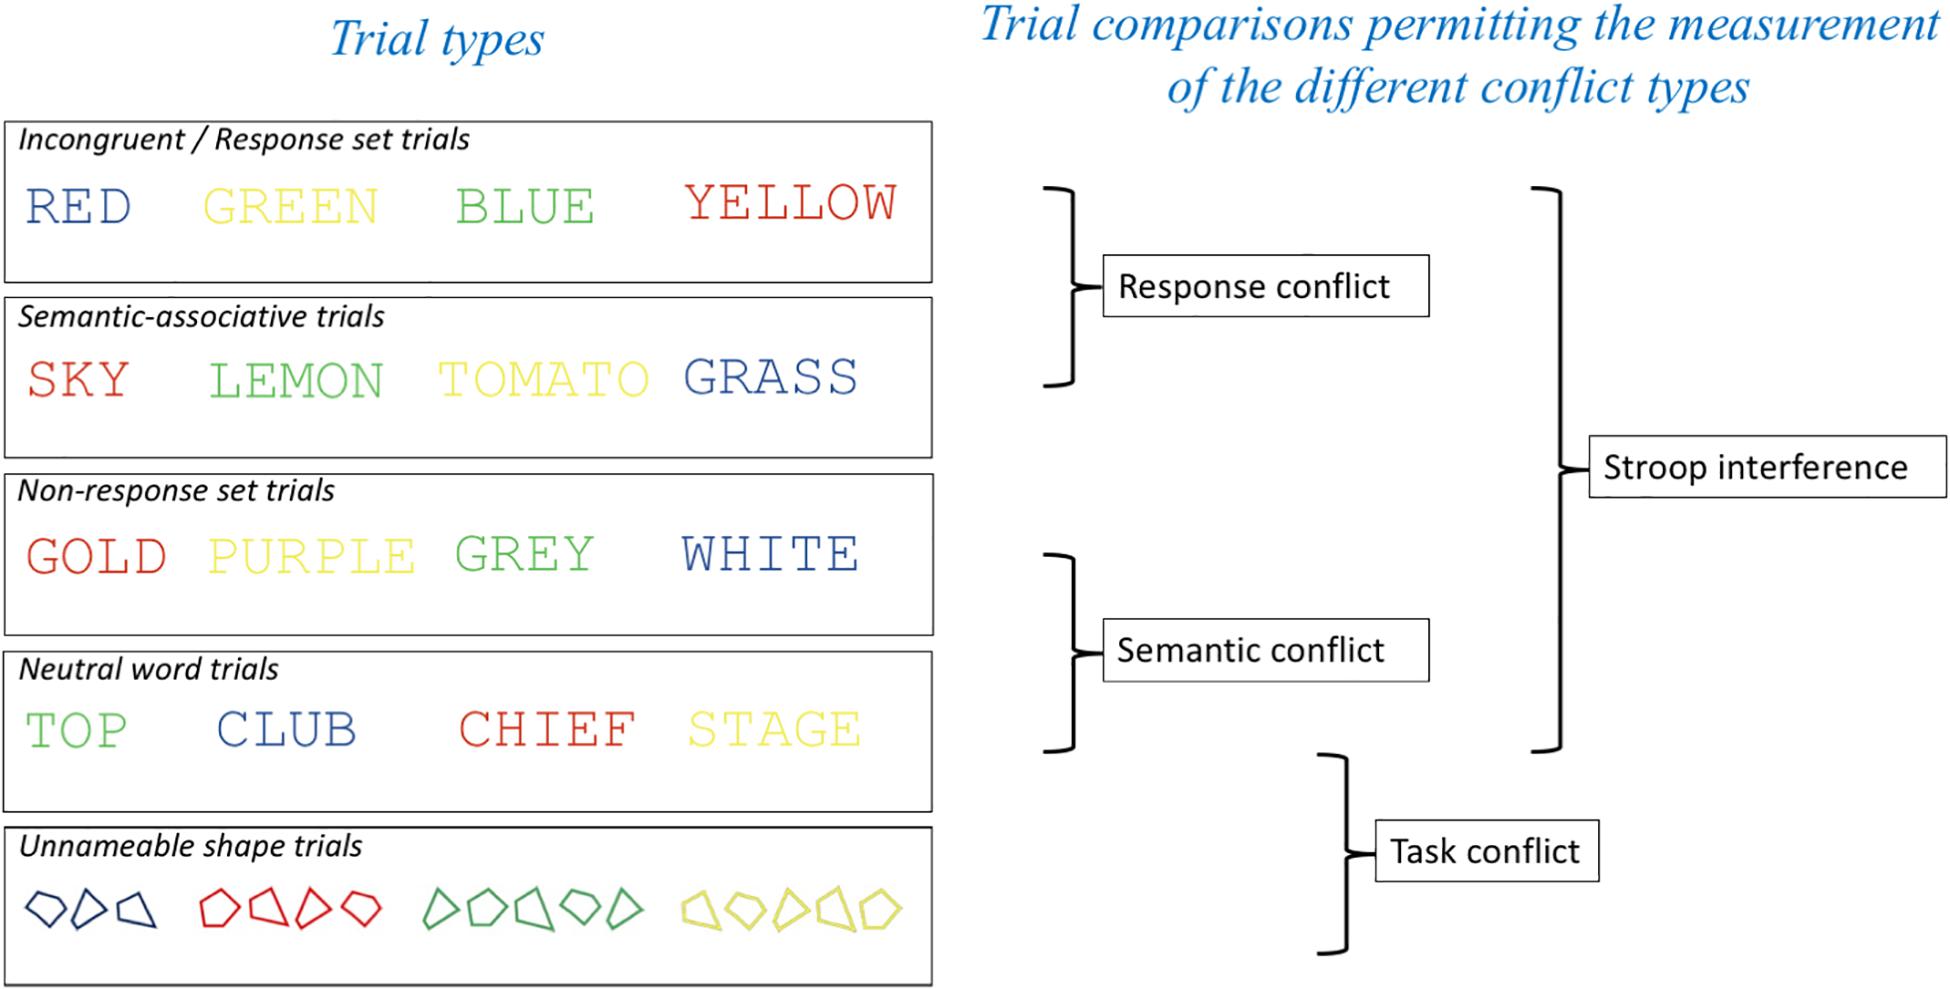 Frontiers An Fmri Study Of Response And Semantic Conflict In The Stroop Task Psychology